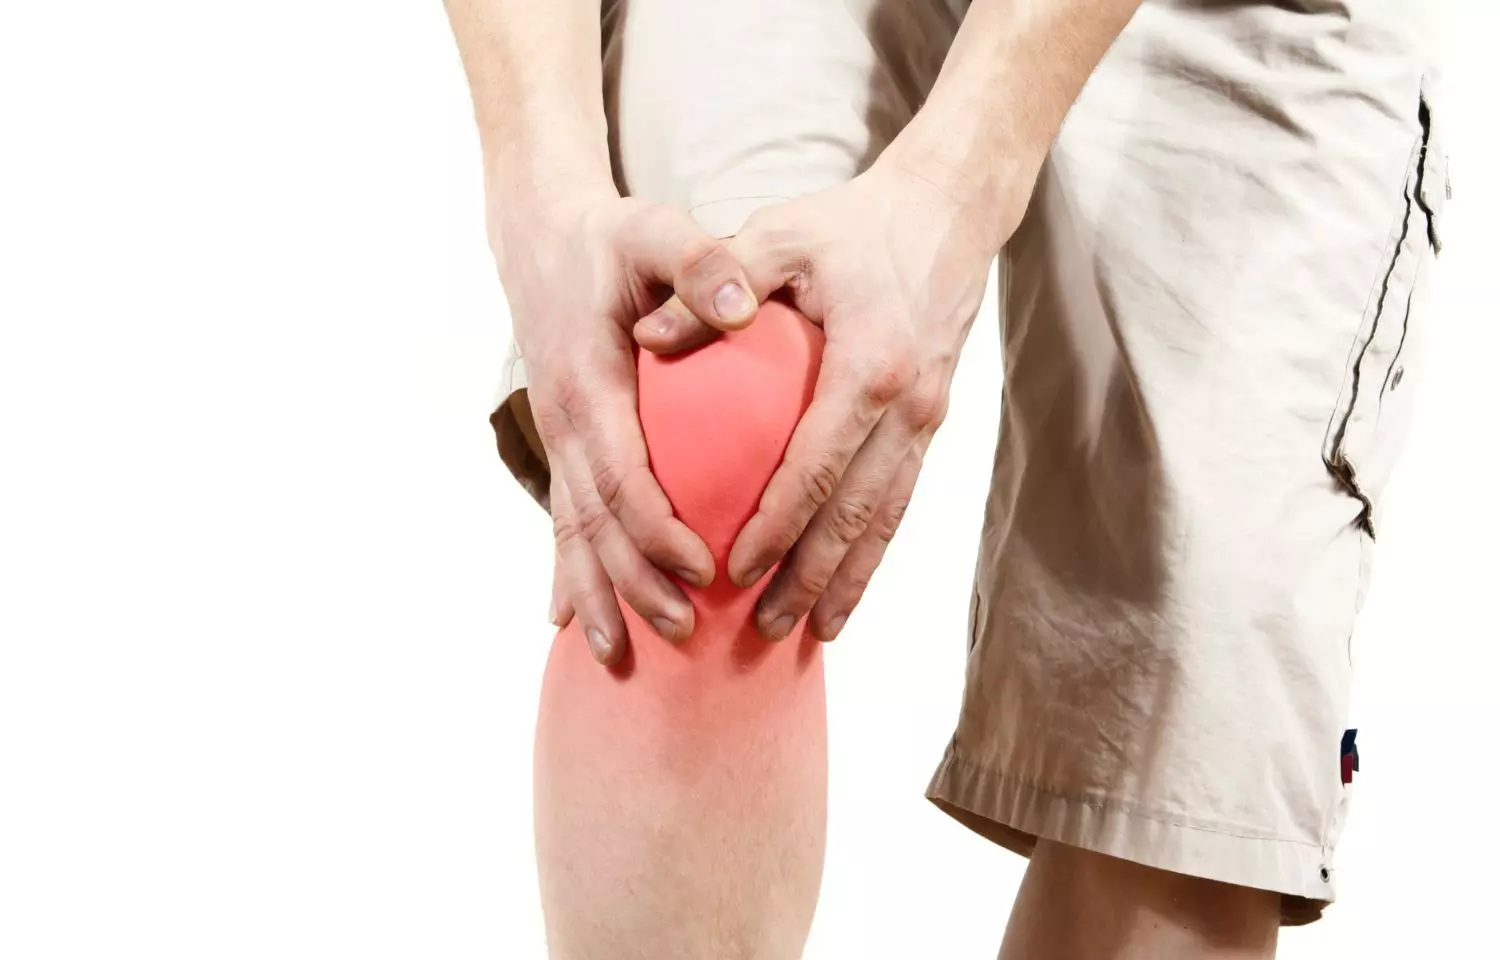 Can walking for exercise help prevent pain in individuals with knee osteoarthritis?